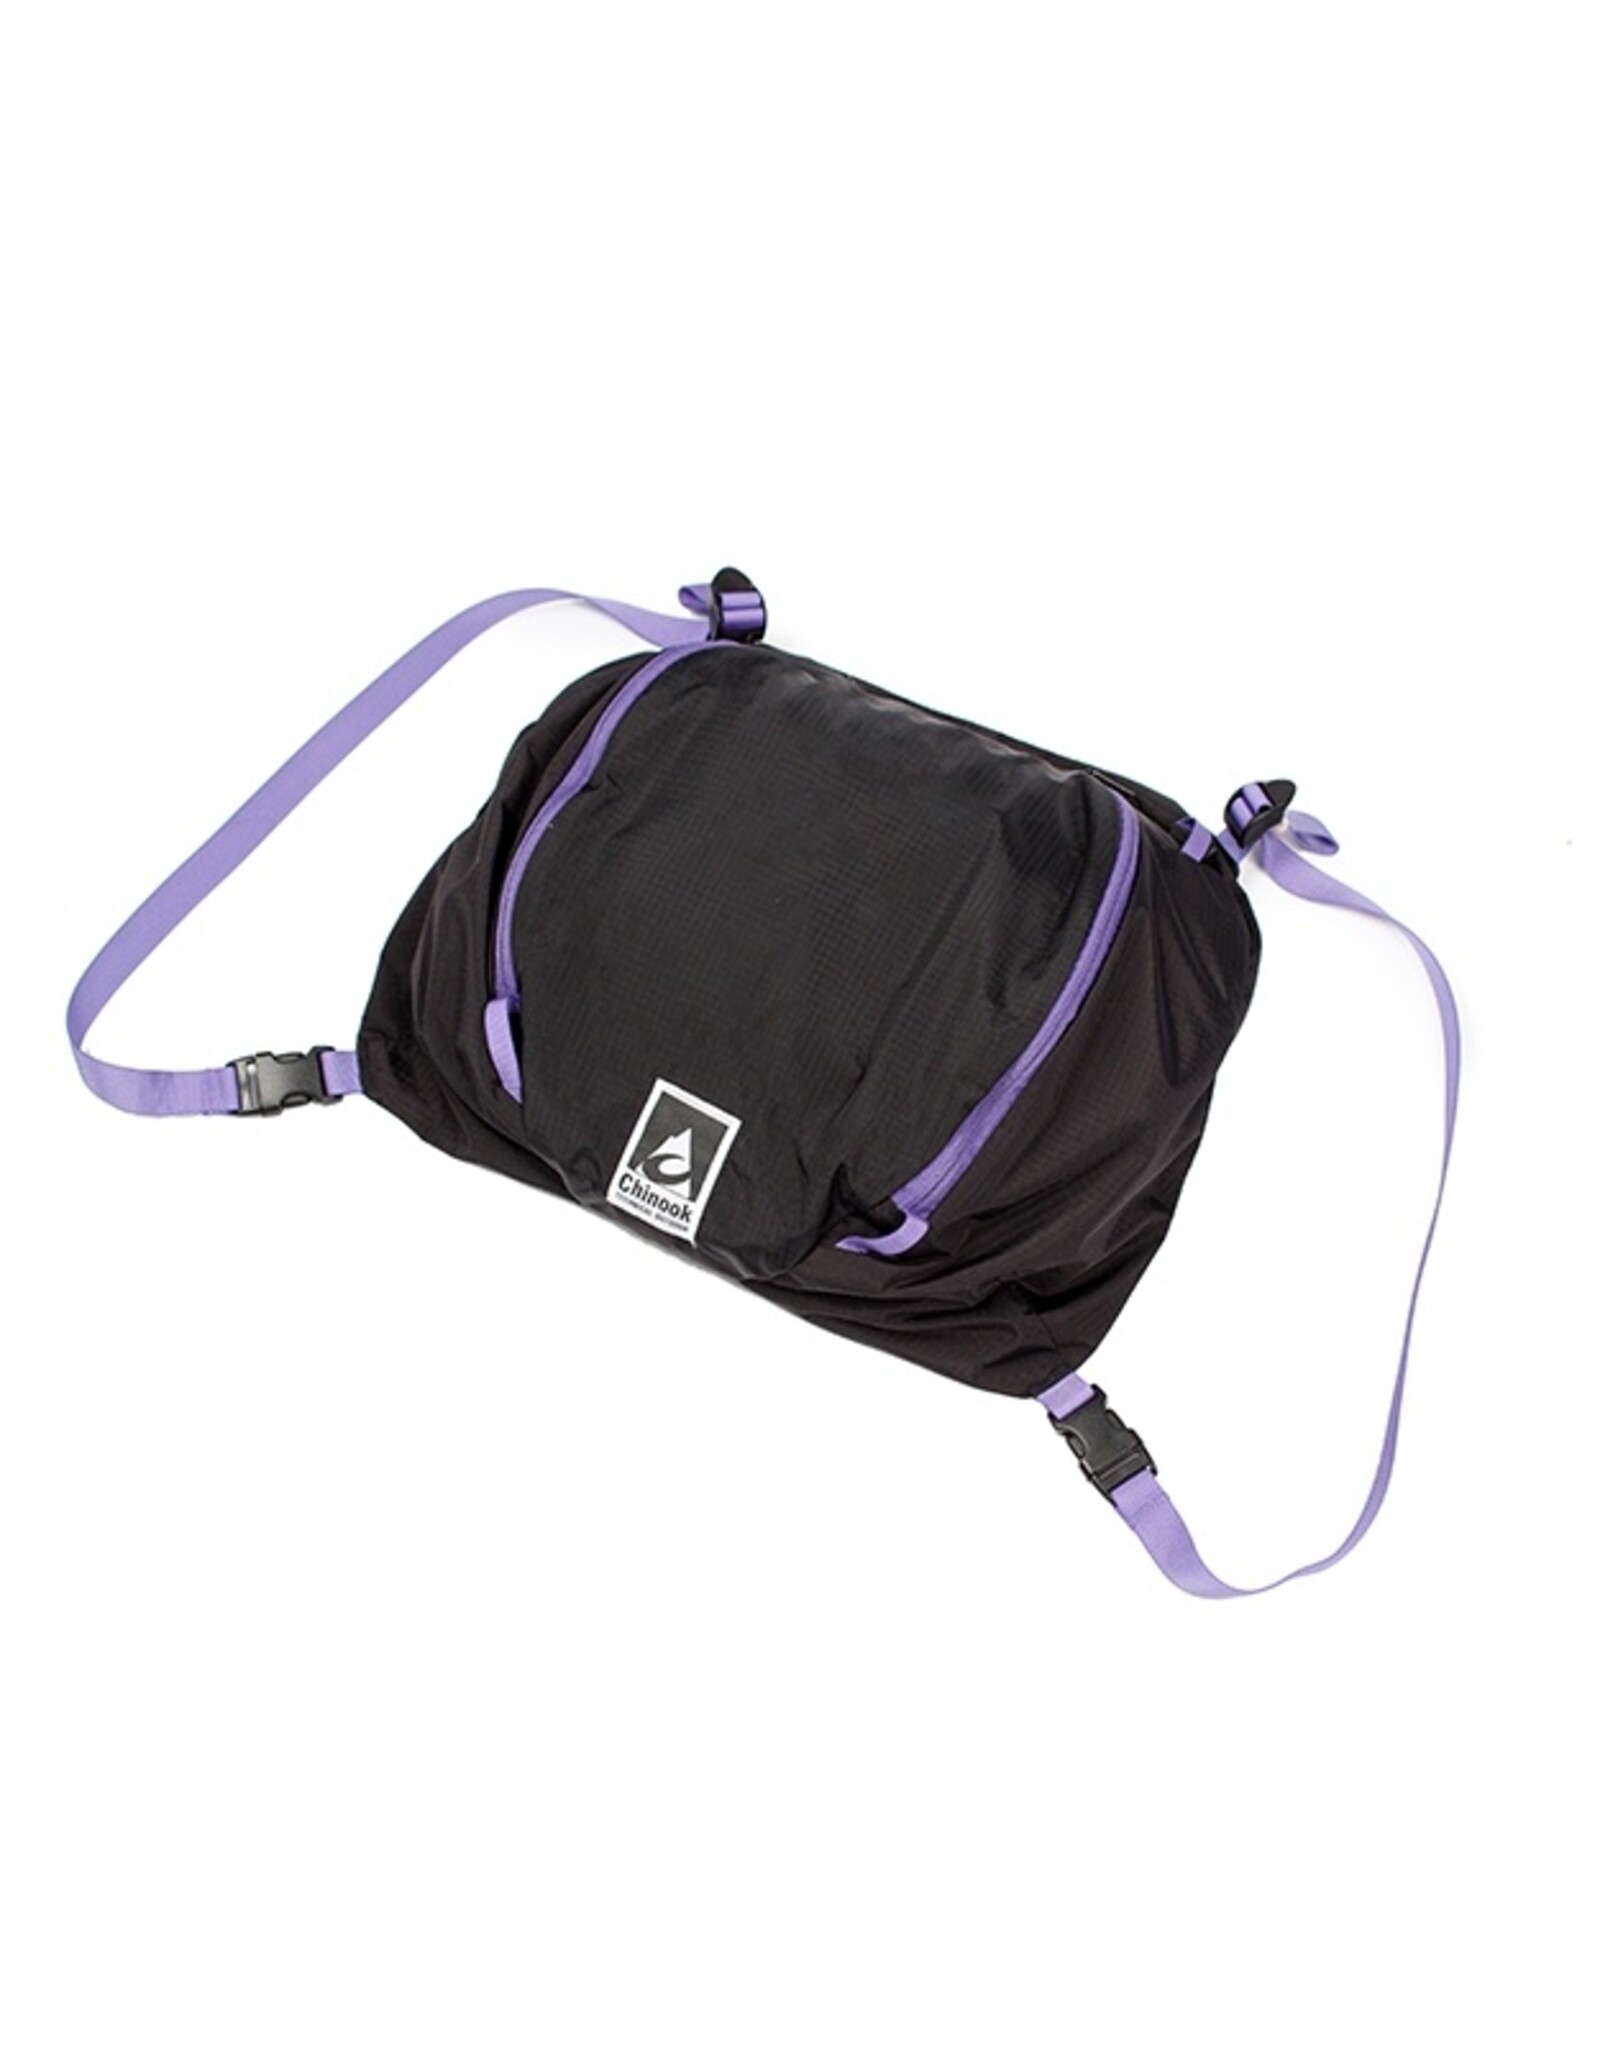 CHINOOK TECHNICAL OUTDOOR ORCA 60+5 LT BACKPACK (LAVENDER)